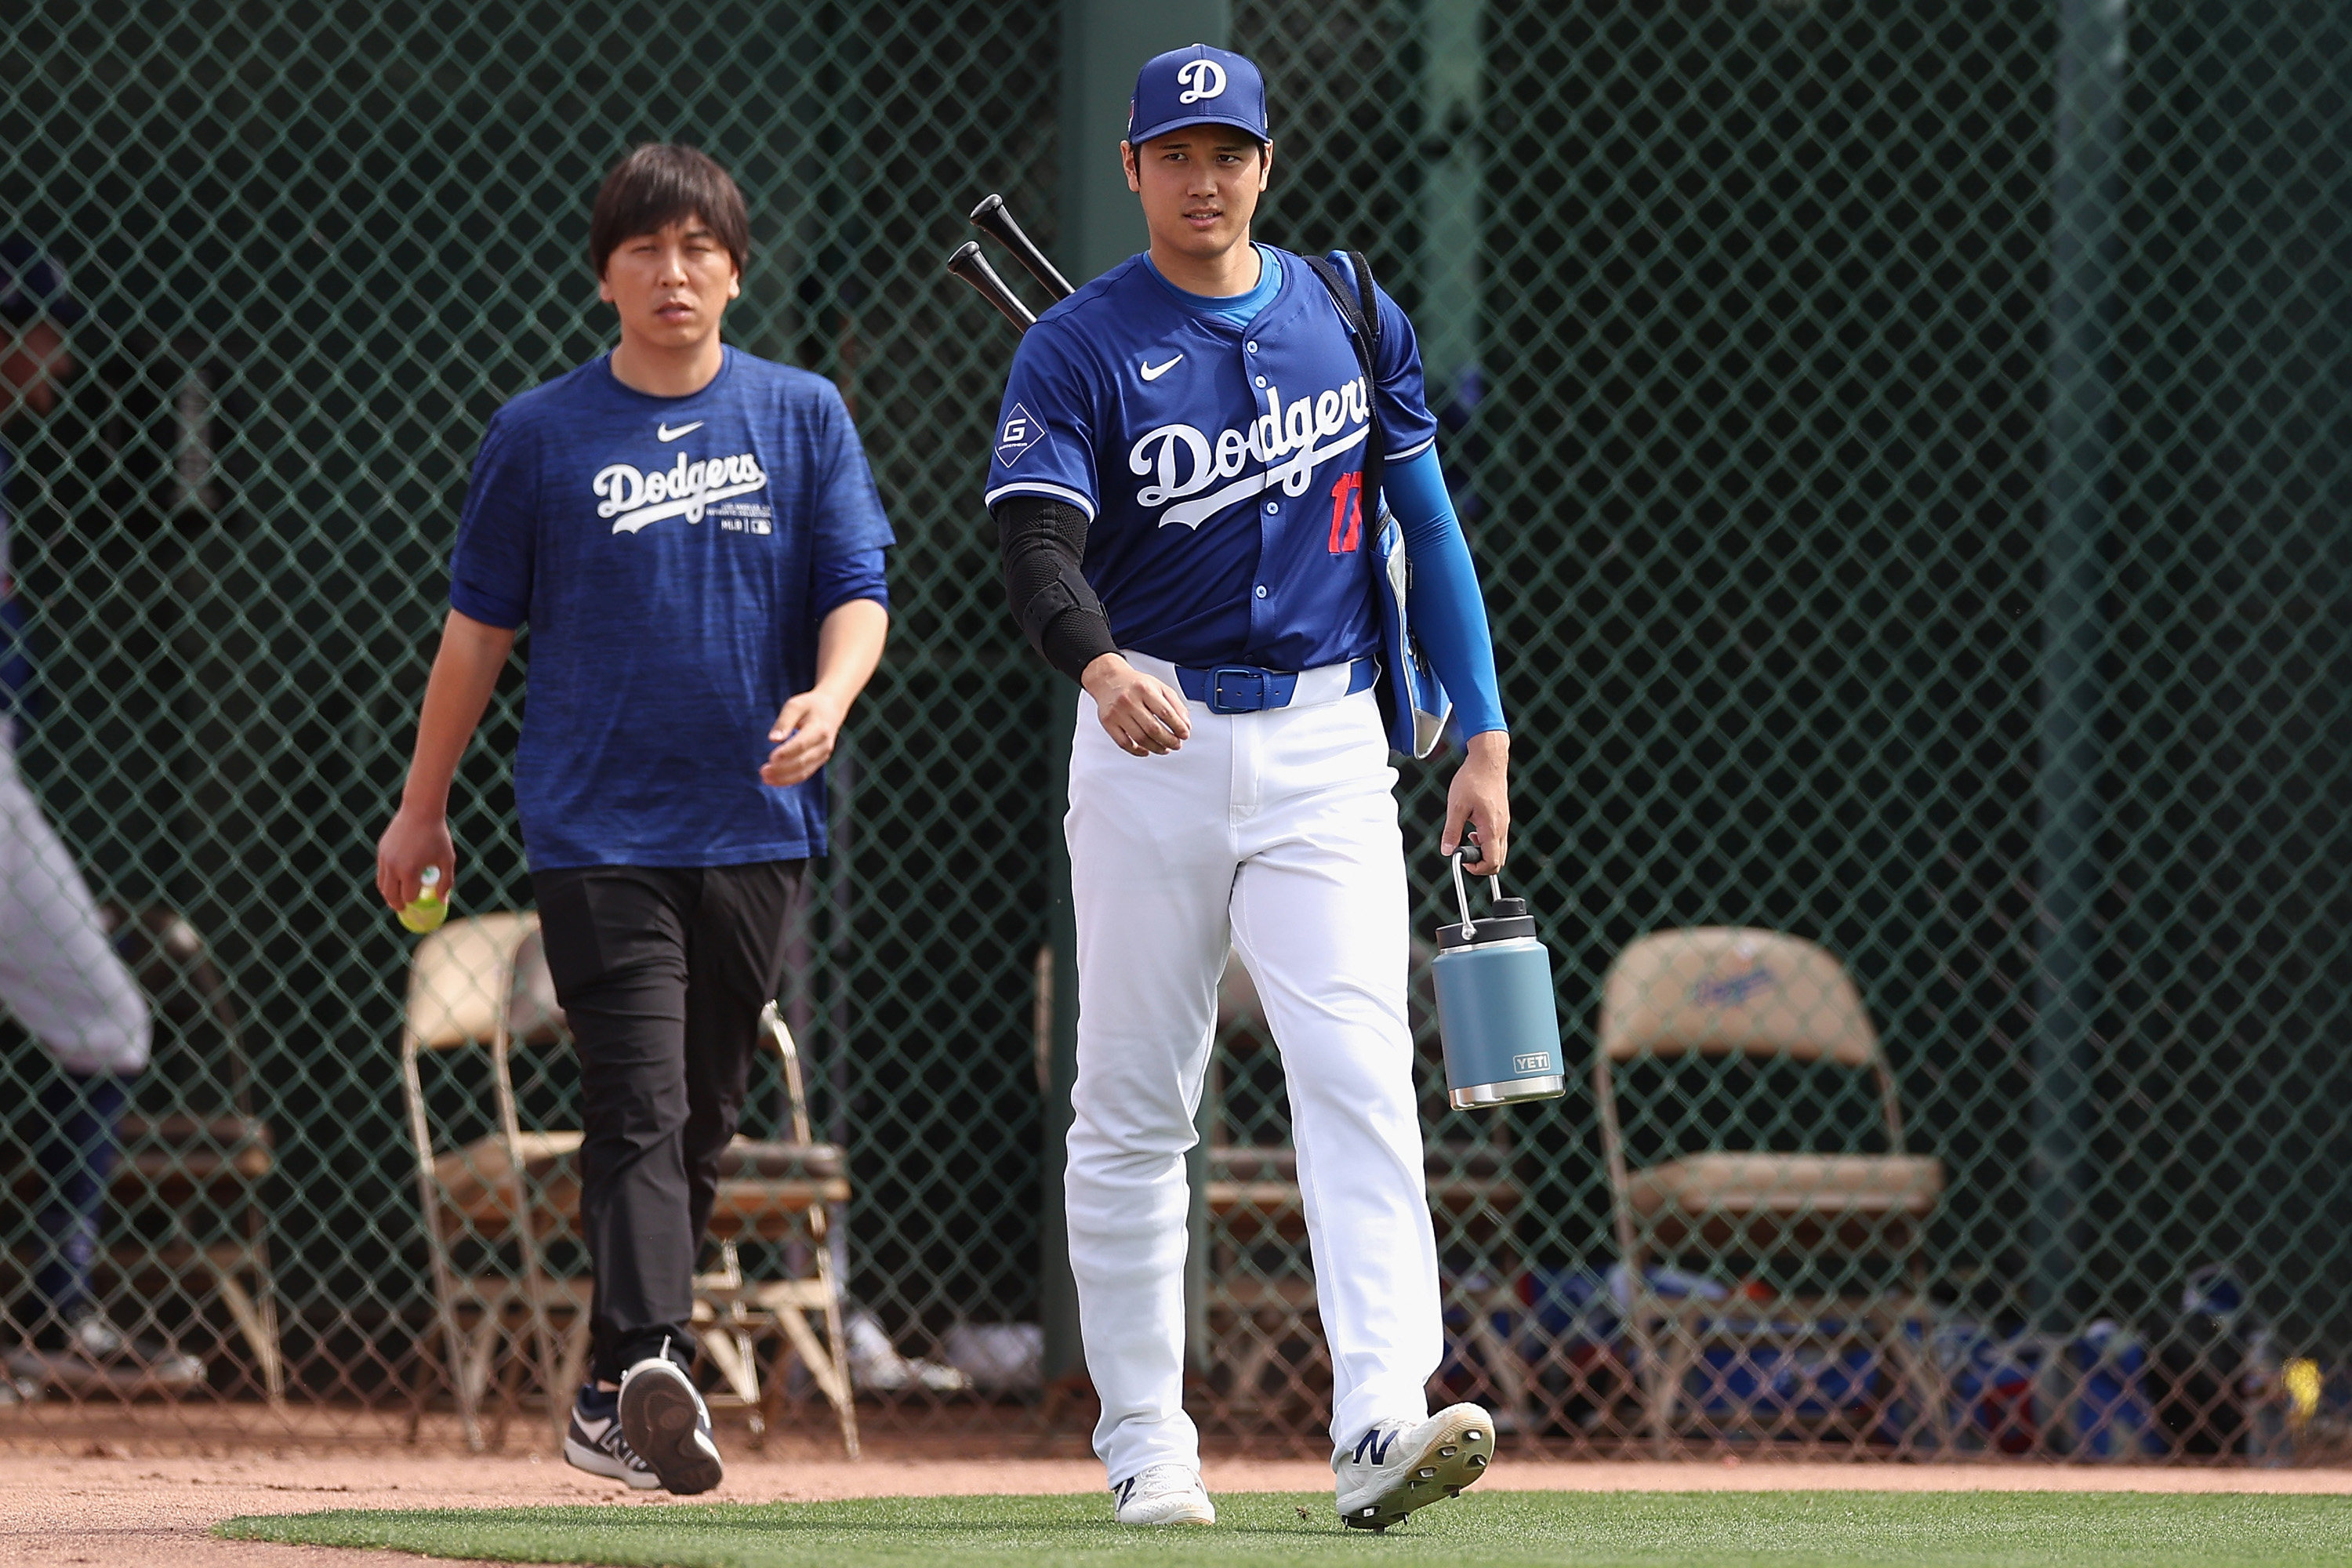 LA Dodgers star Shohei Ohtani and interpreter Ippei Mizuhara arrive for a game against the Chicago White Sox during spring training in Glendale, Arizona. Photo: Getty Images